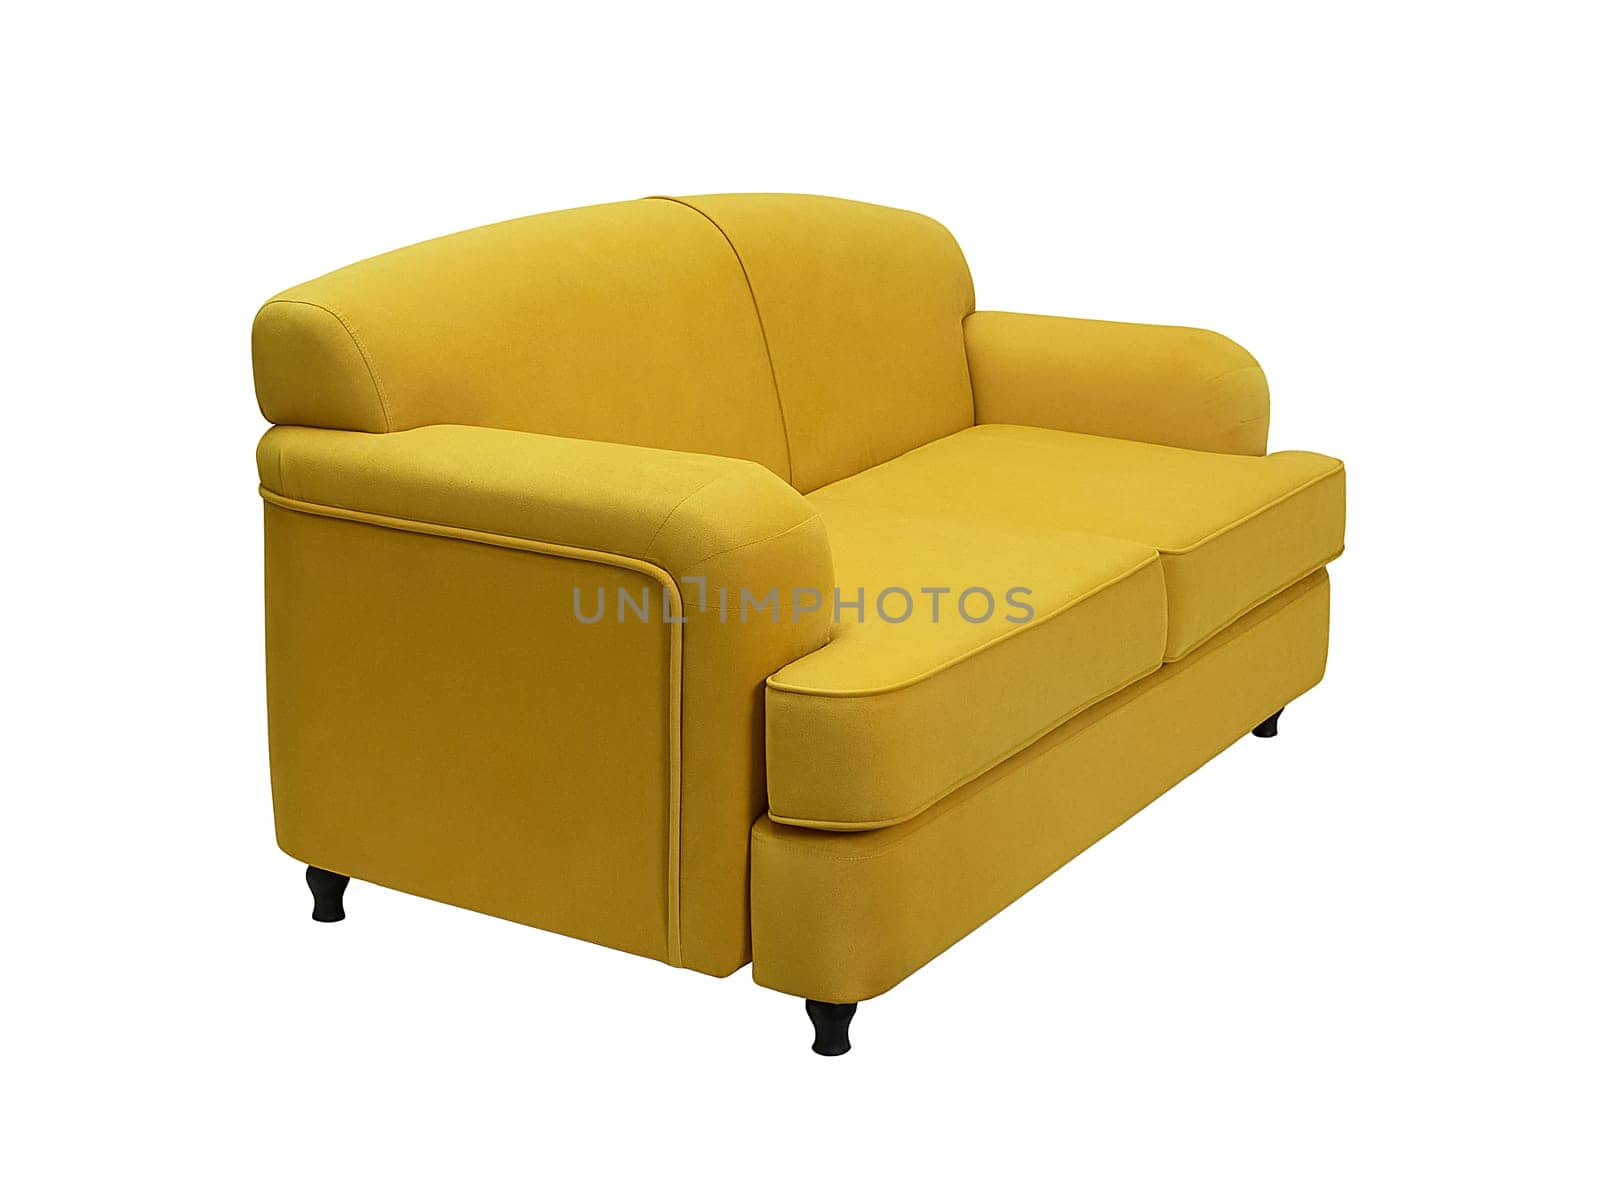 modern yellow fabric sofa isolated on white background, side view. retro couch, furniture in minimal style, interior, home design